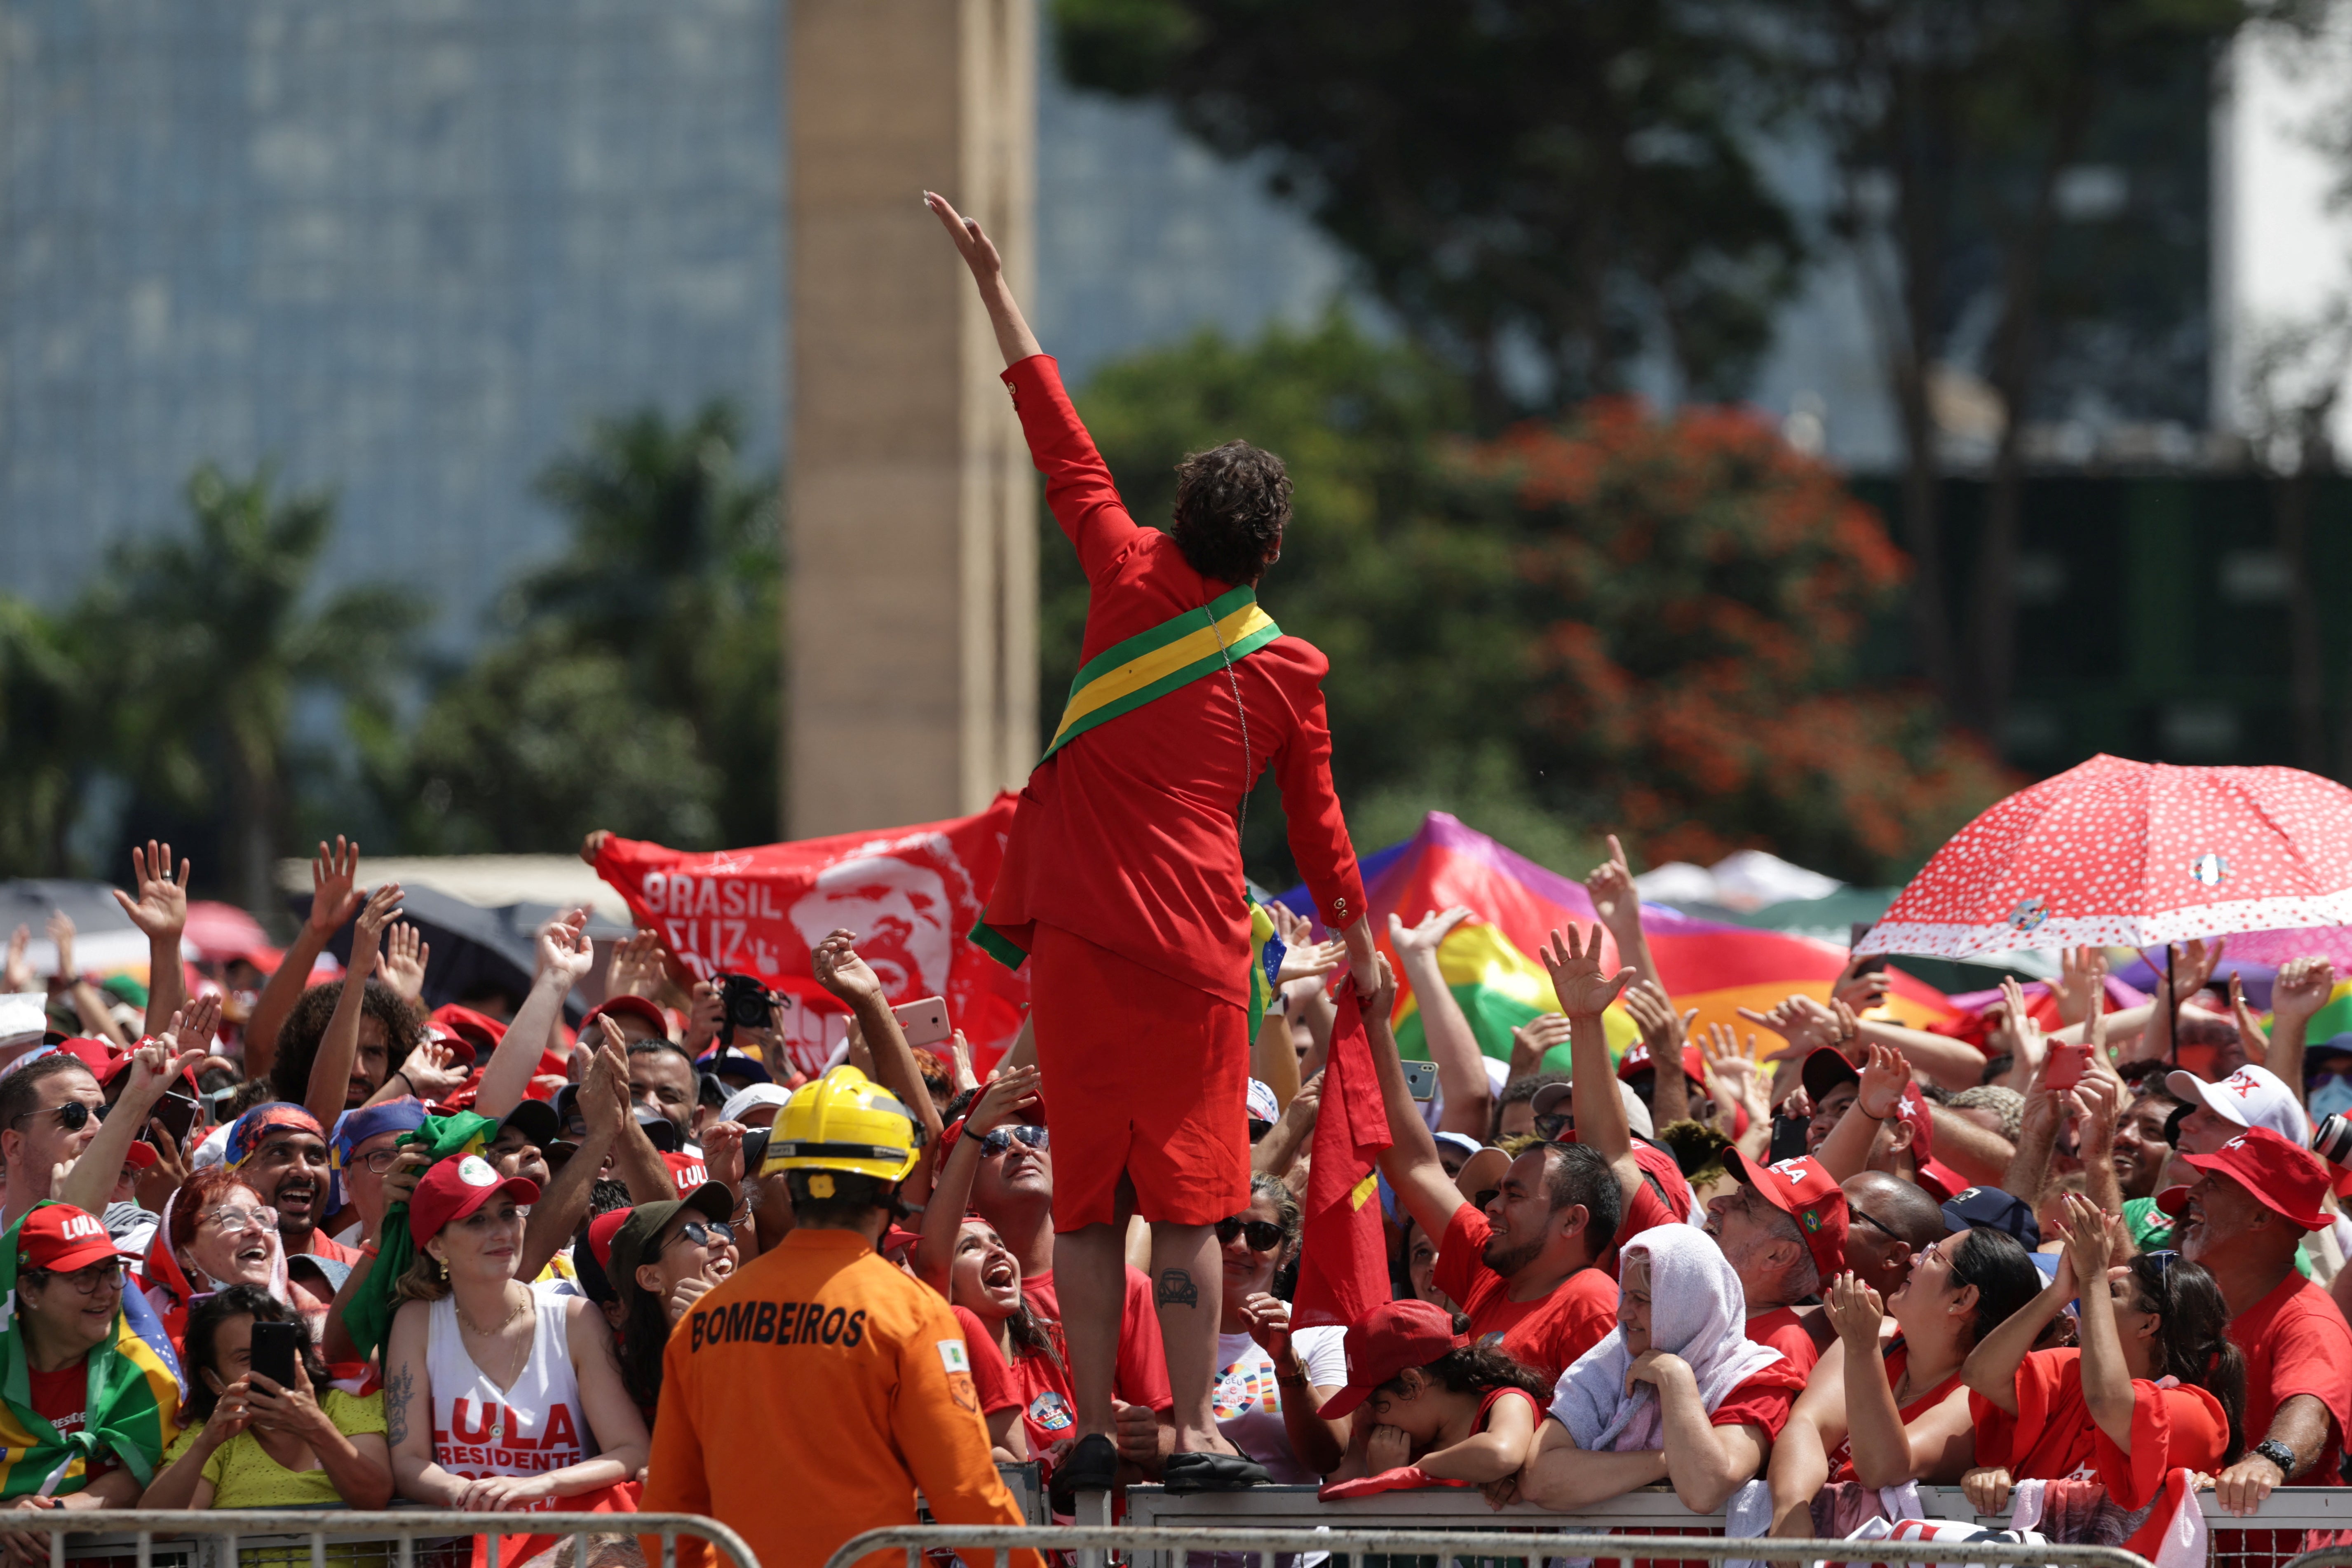 Lula’s supporters line the streets in Brasilia as he is sworn in for a third term